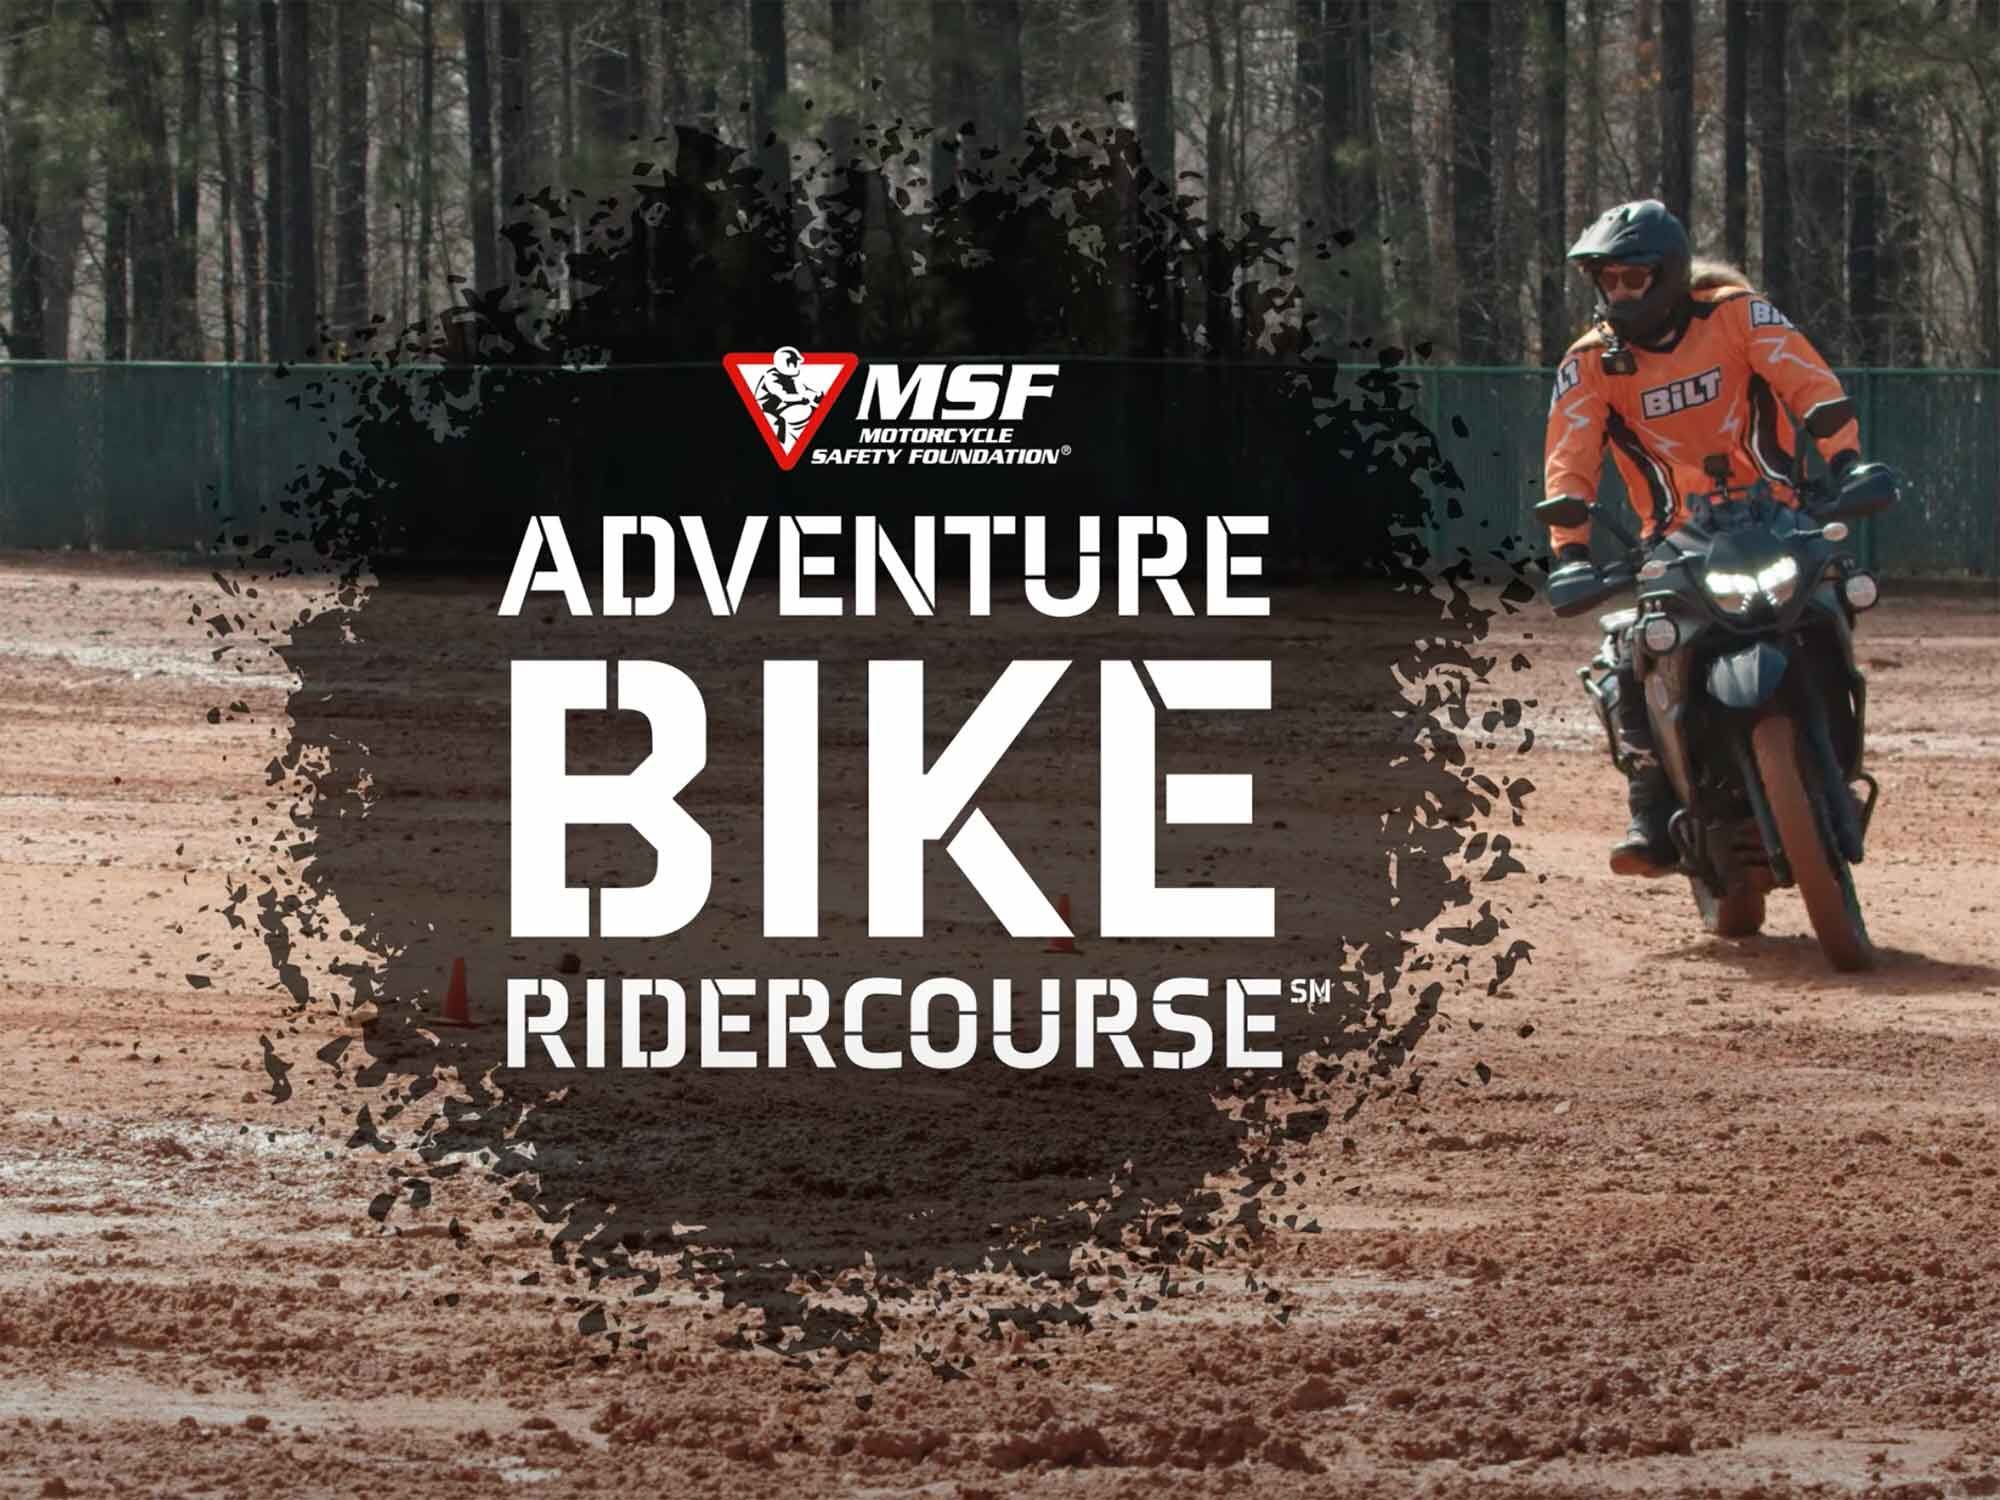 The MSF’s new AdventureBike RiderCourse helps riders build off-road riding skills such as riding in the dirt while standing.